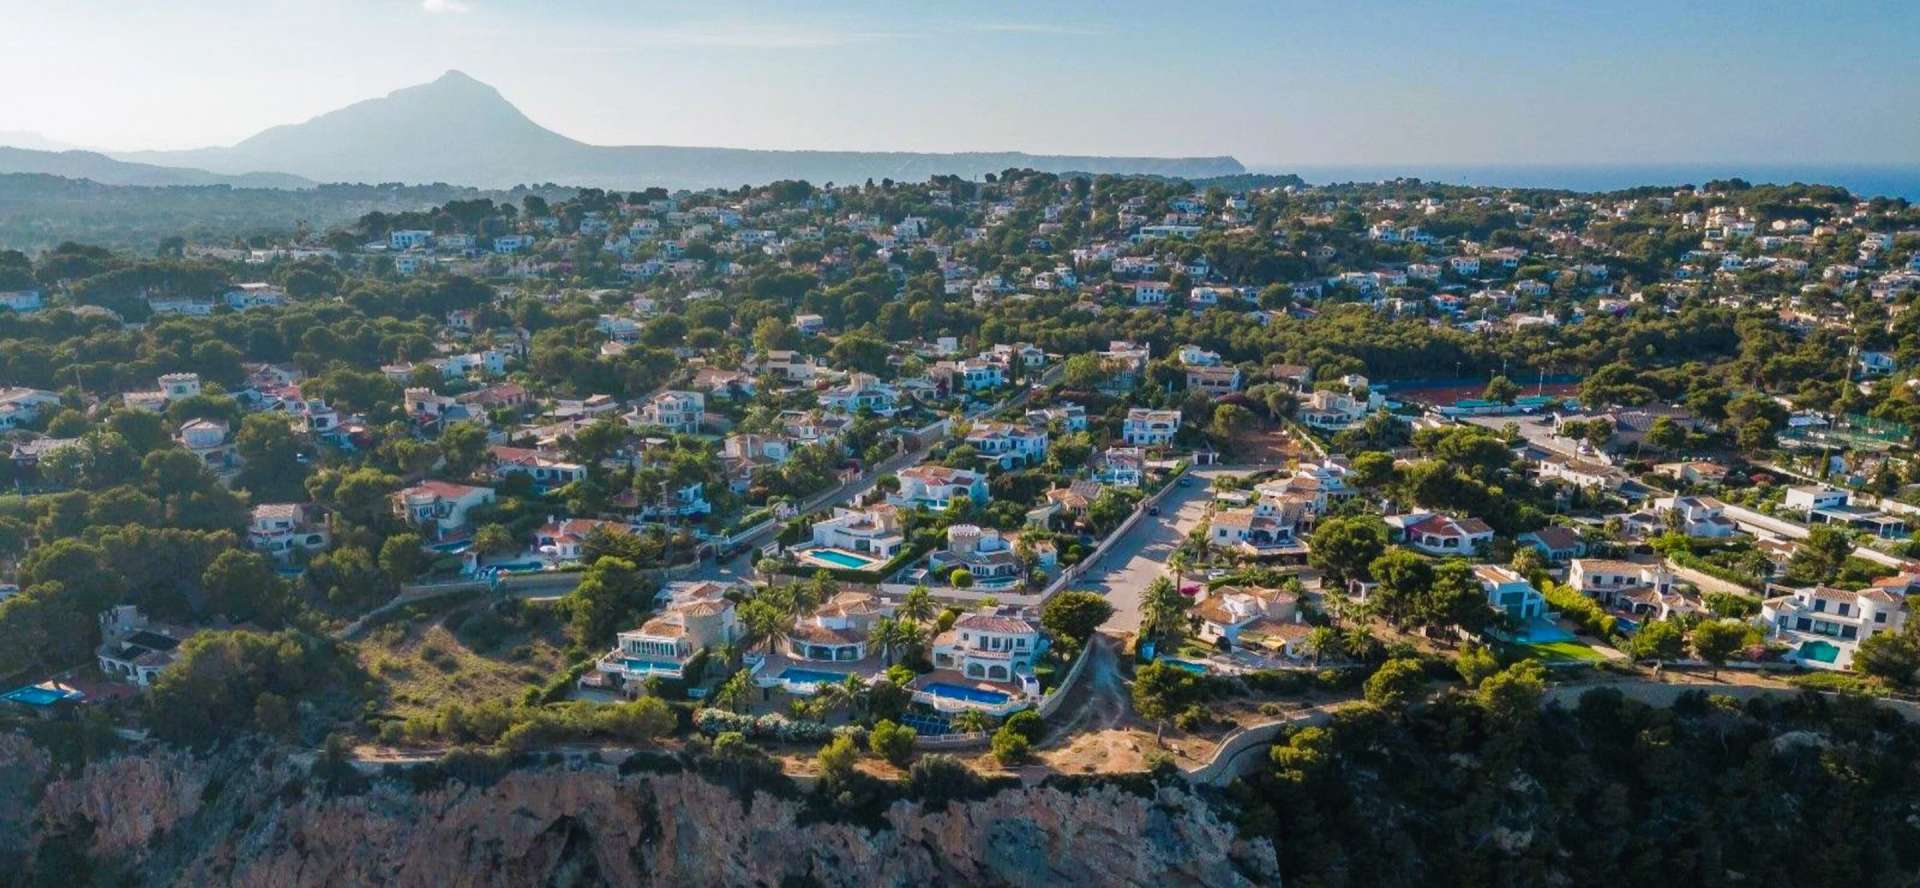 COSTA HOUSES Luxury Villas SL ®️ - The most exclusive residential areas of Javea - The pearl of the Mediterranean Sea, Costa Blanca